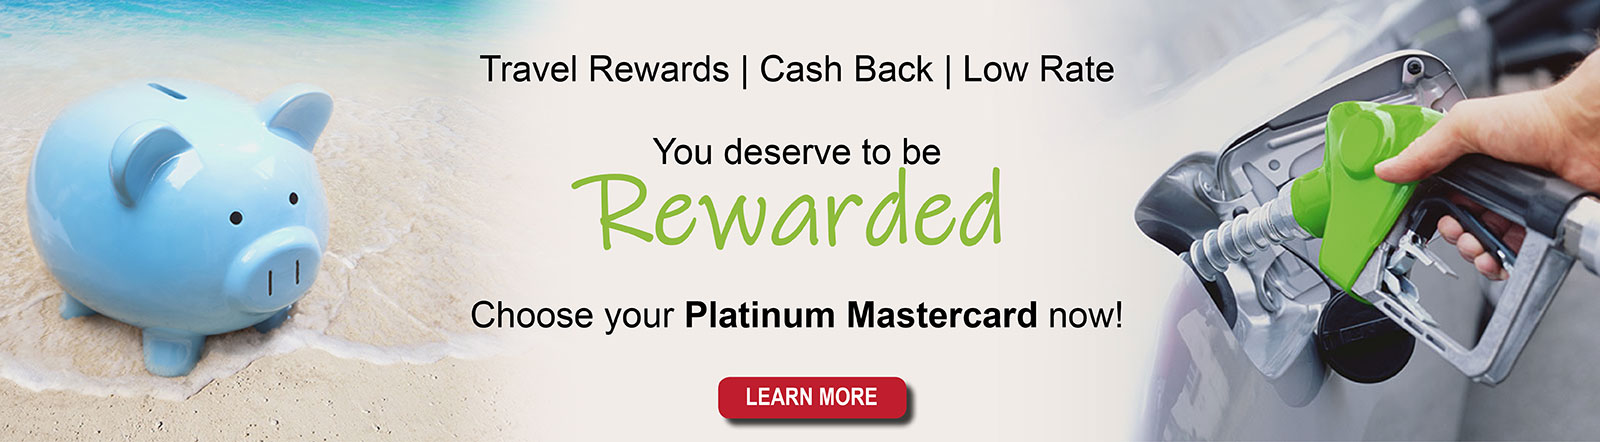 You deserve to be rewarded. Choose your Platinum Mastercard now!